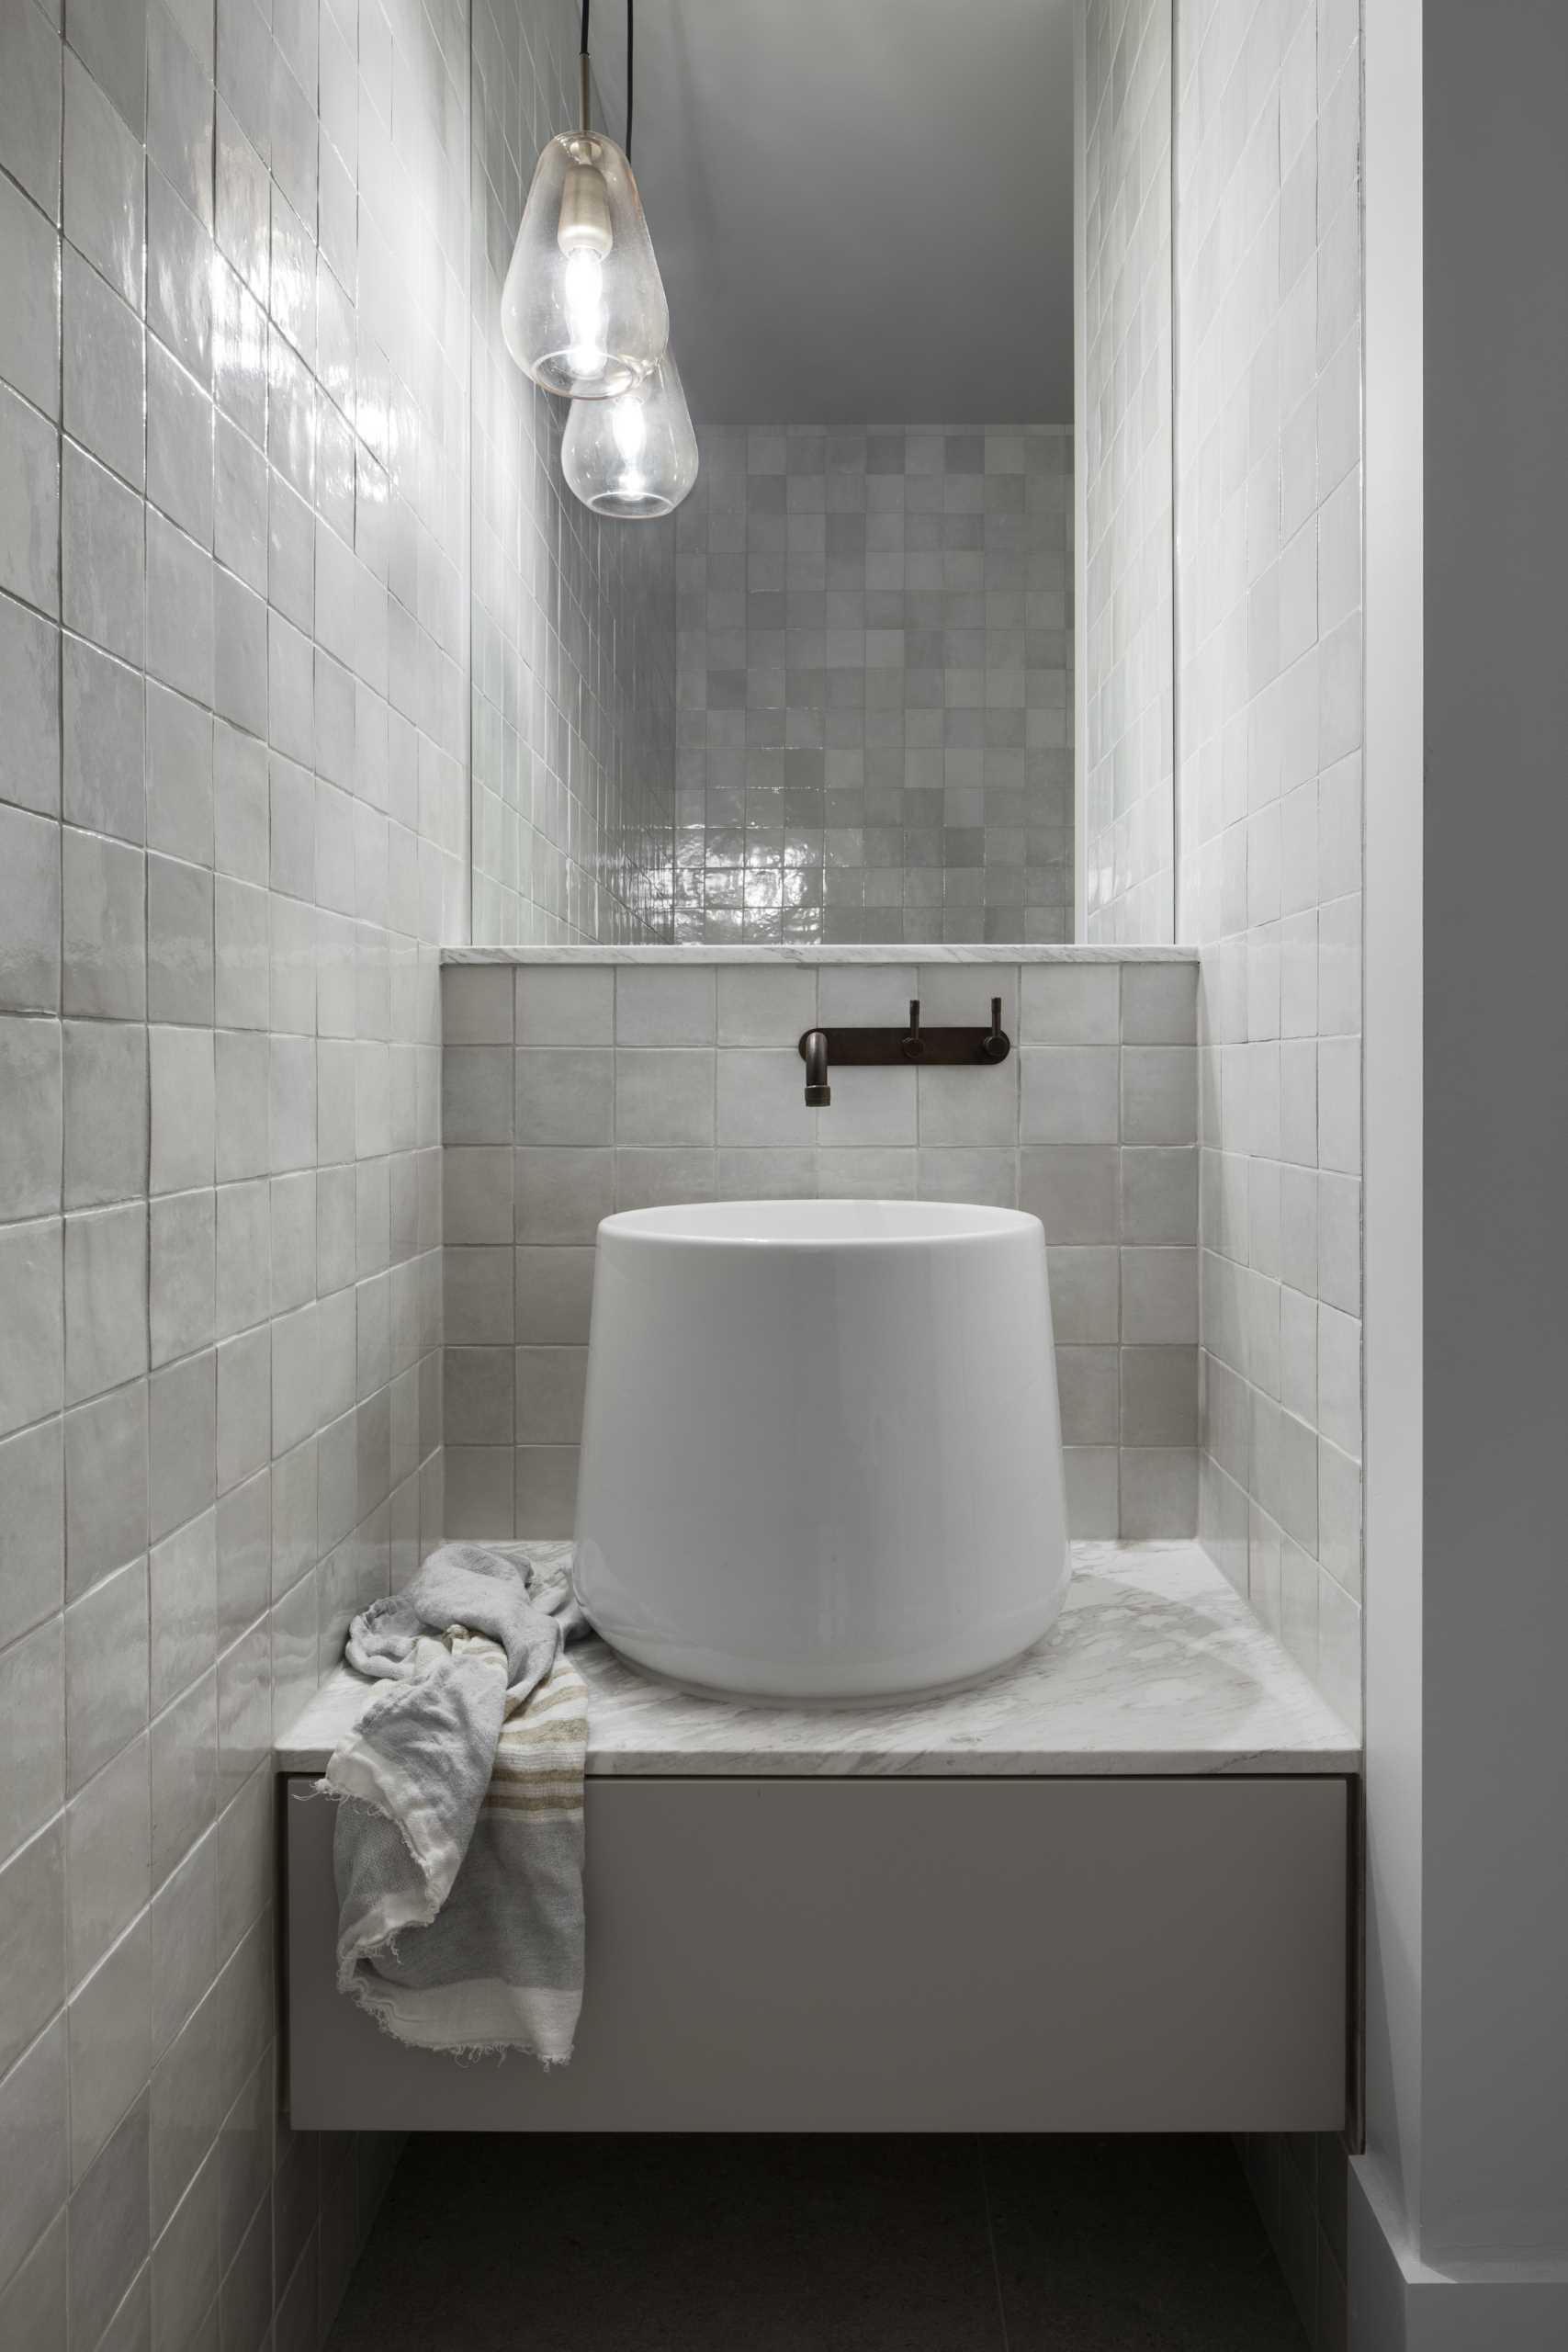 In this powder room, square tiles cover the walls, while the mirror makes the room feel larger than it is.